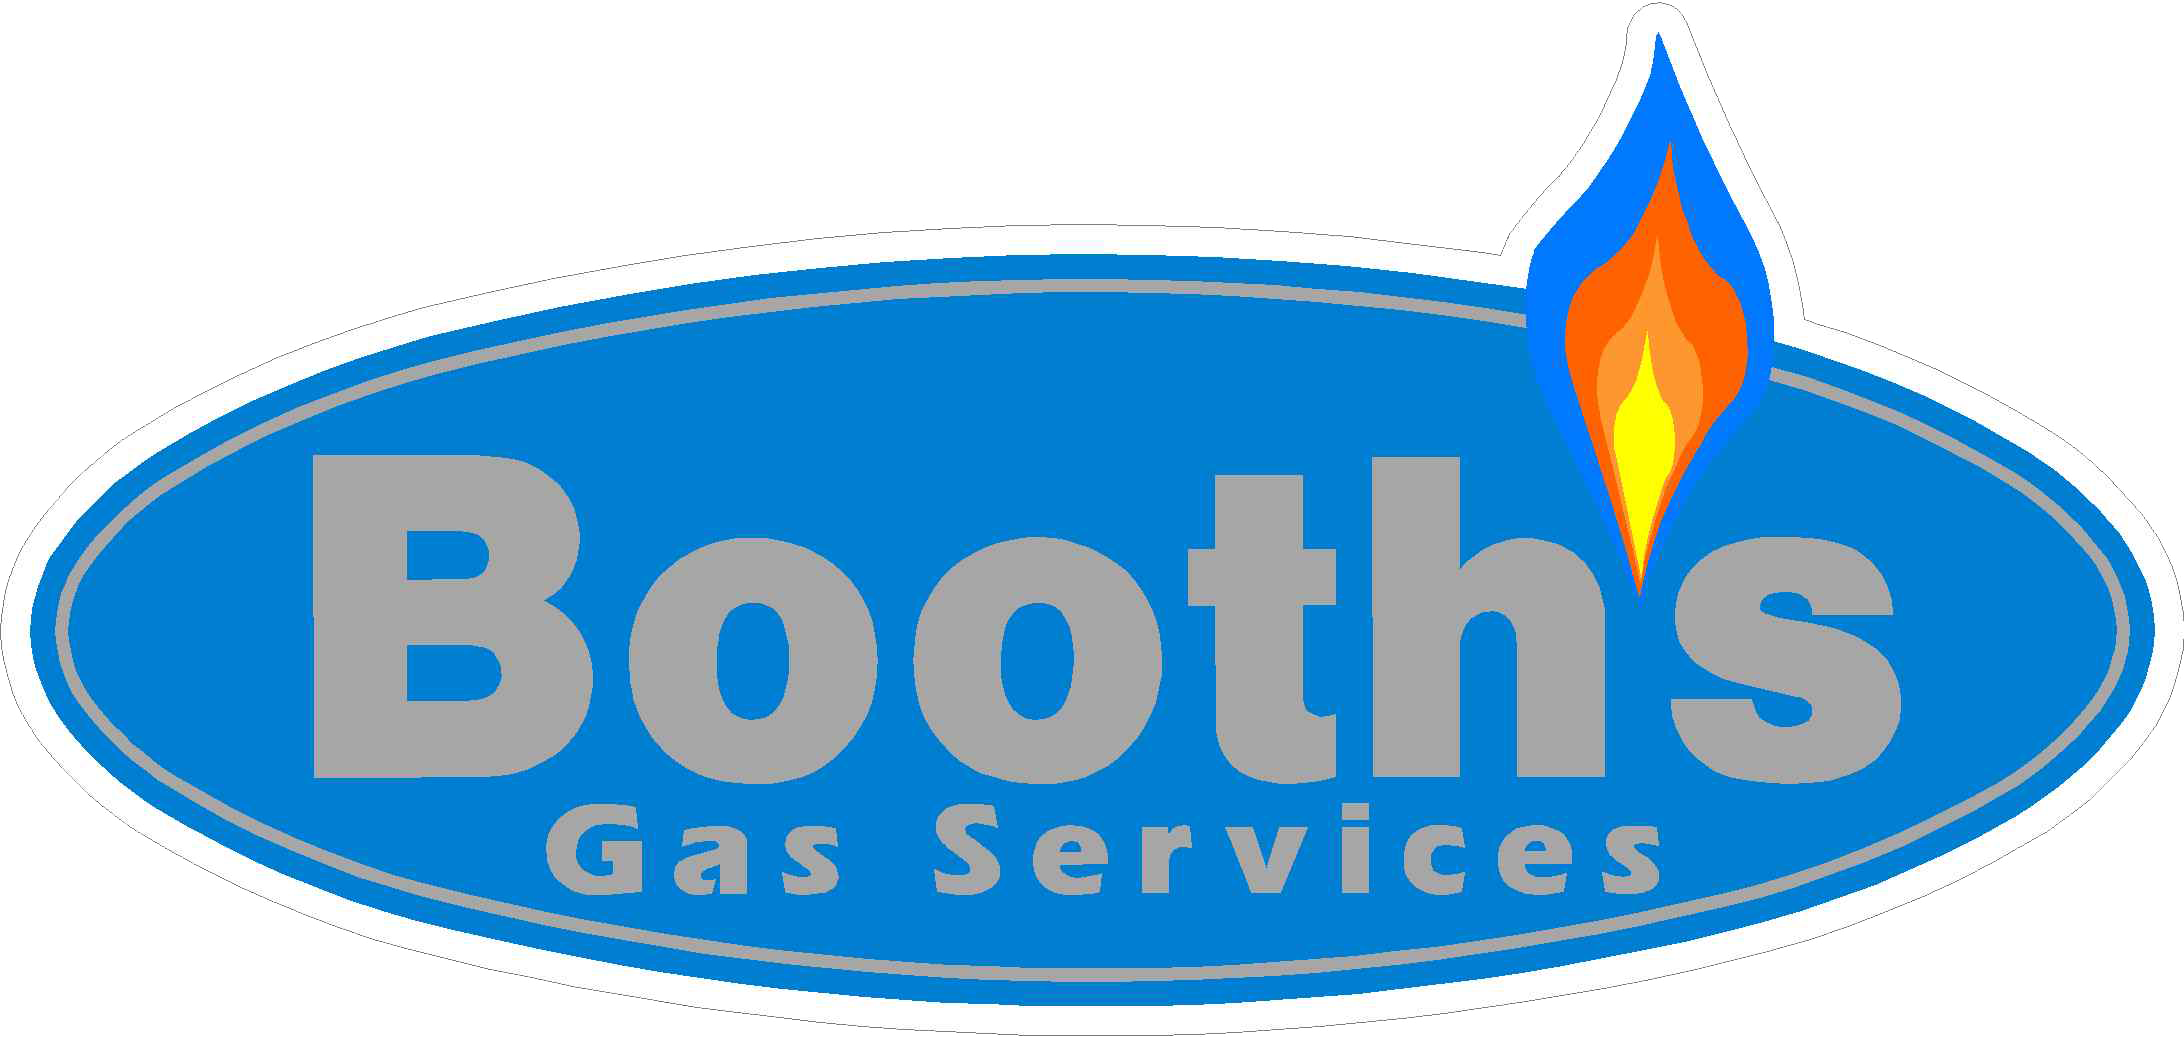 Booths - Gas Services